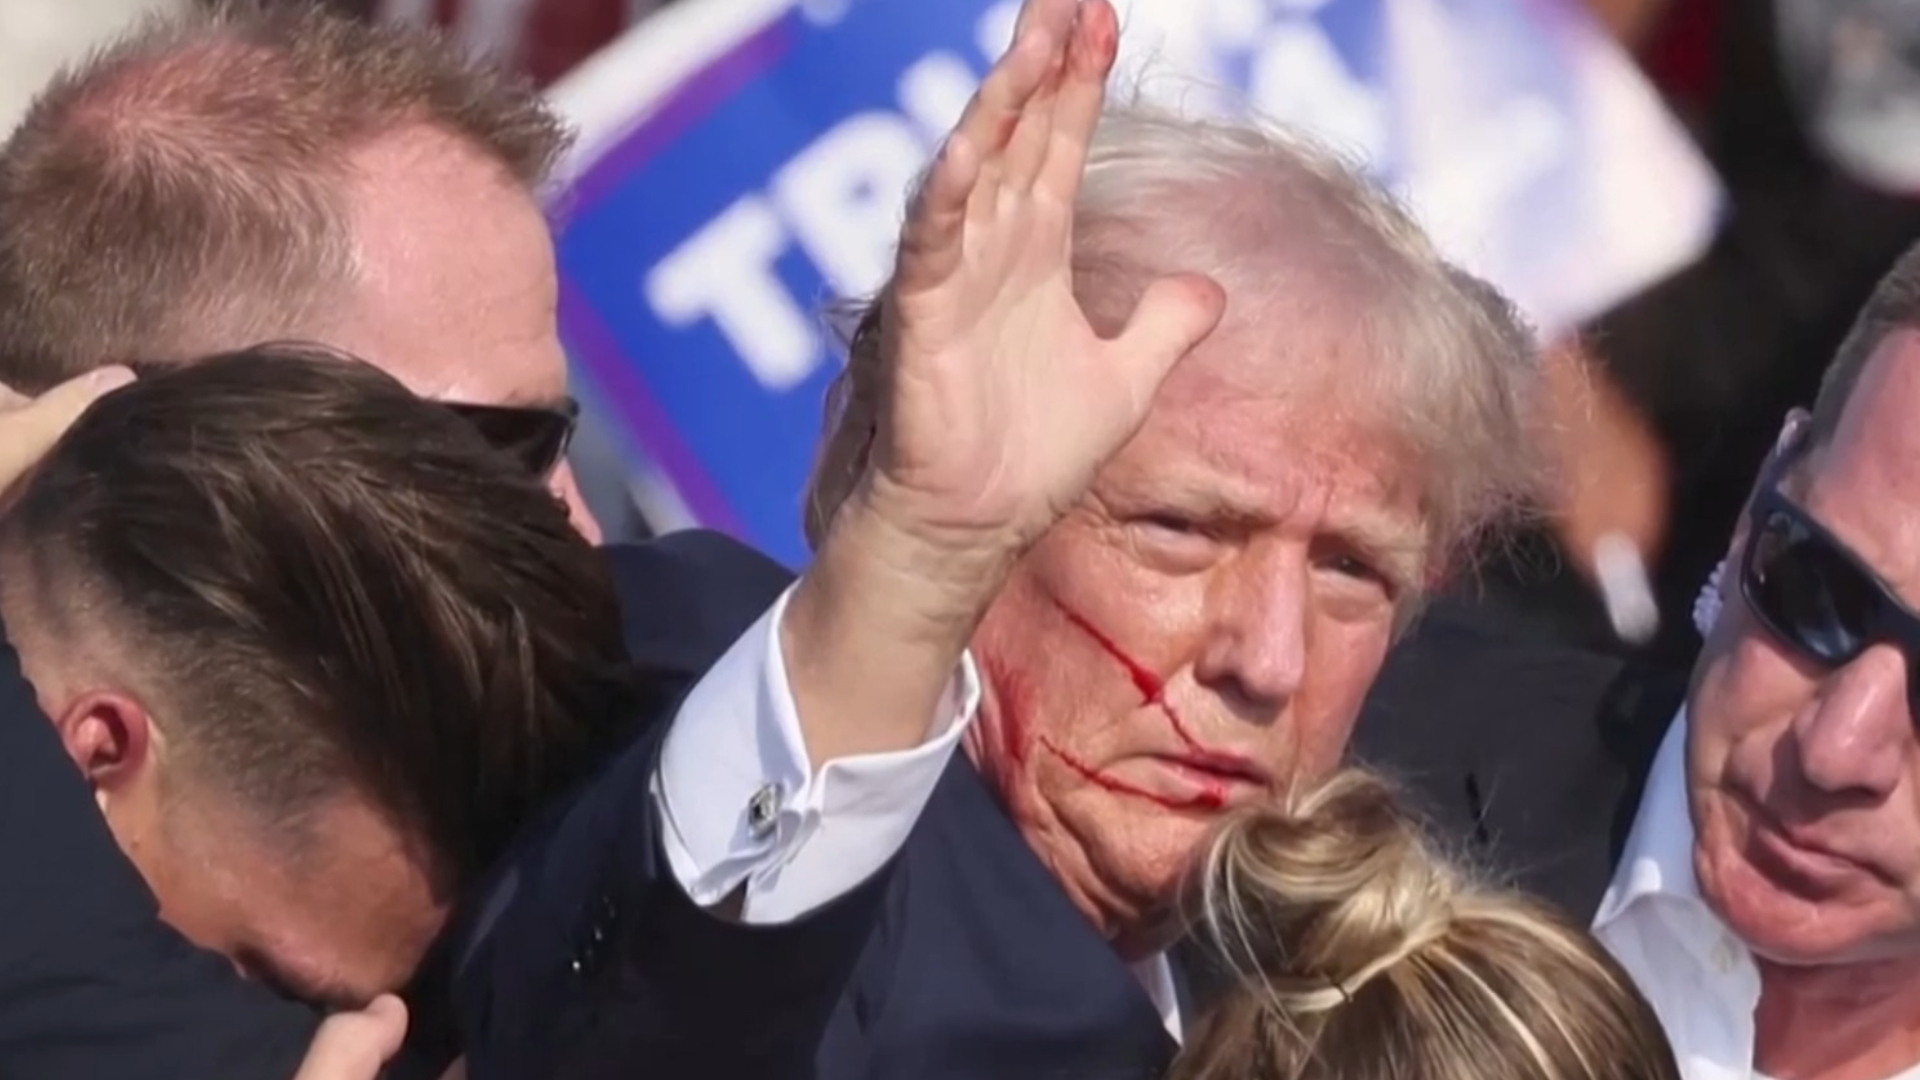 Investigations uncover security failures in Trump assassination attempt